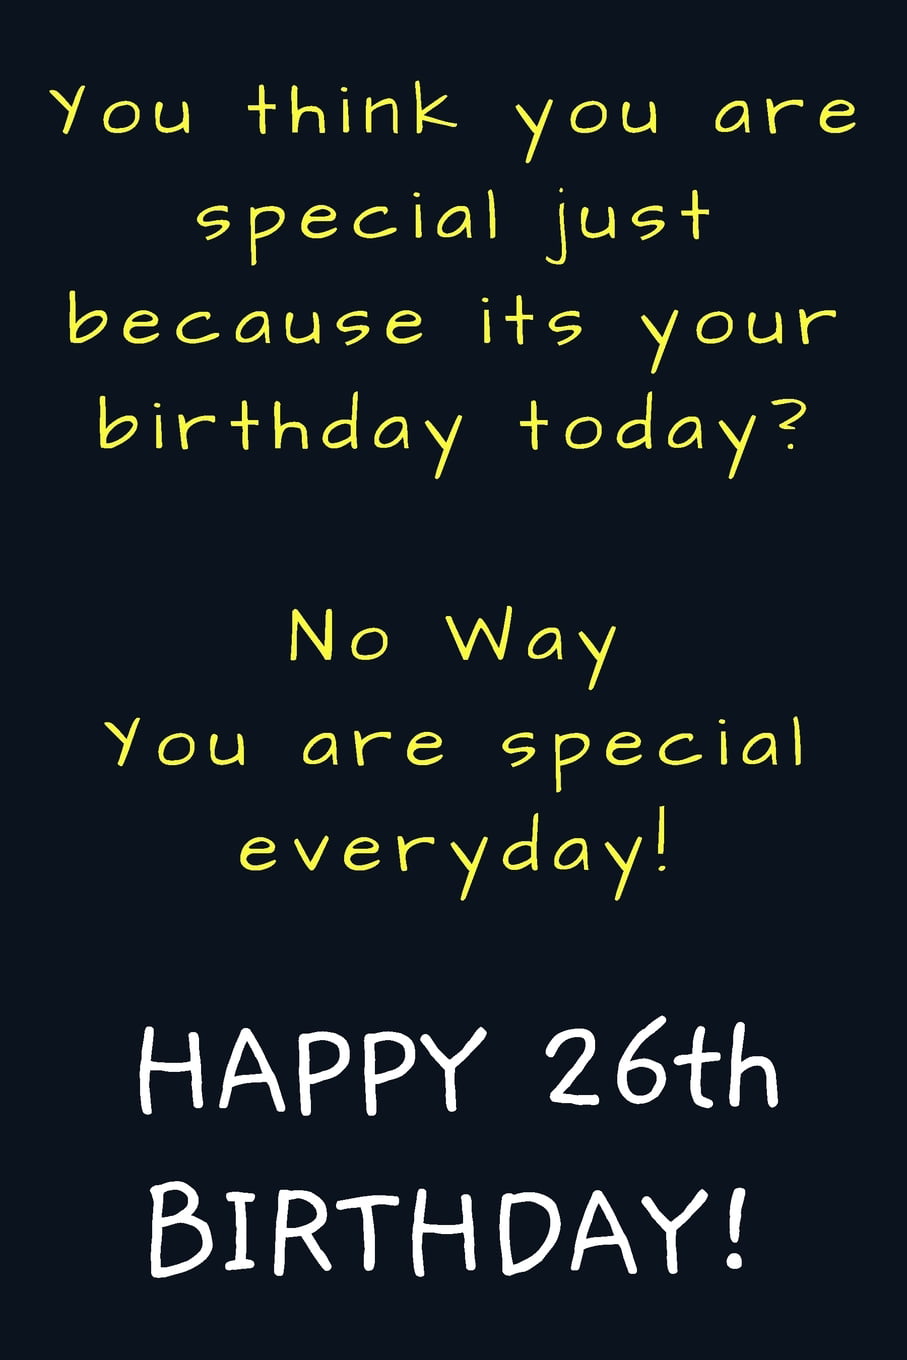 everyone tommorow is my birthday (26th)